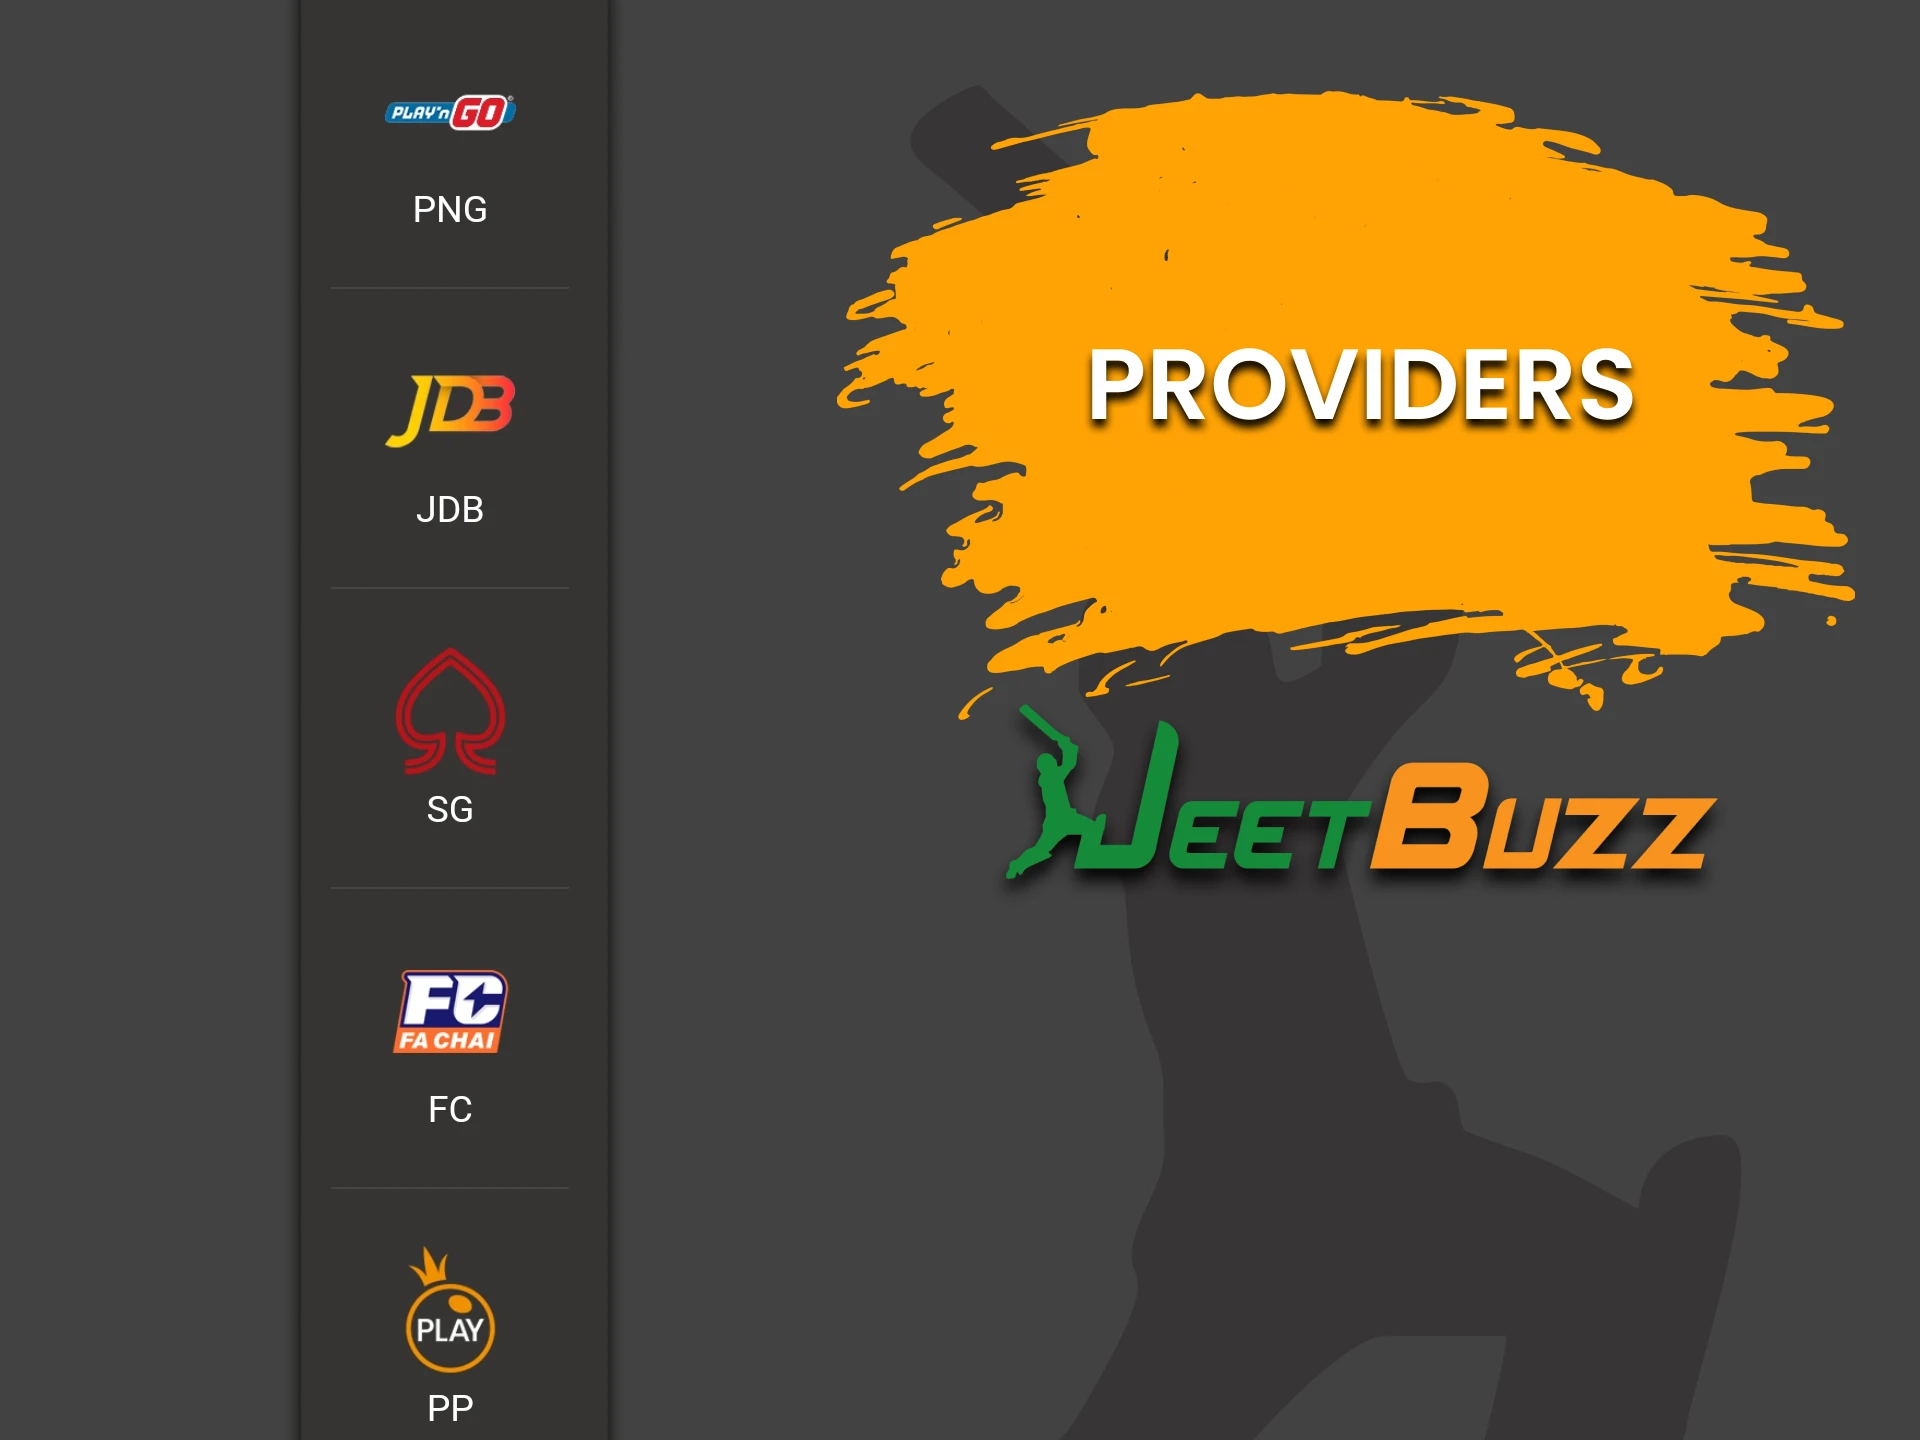 Find out which Slots game providers are on JeetBuzz.